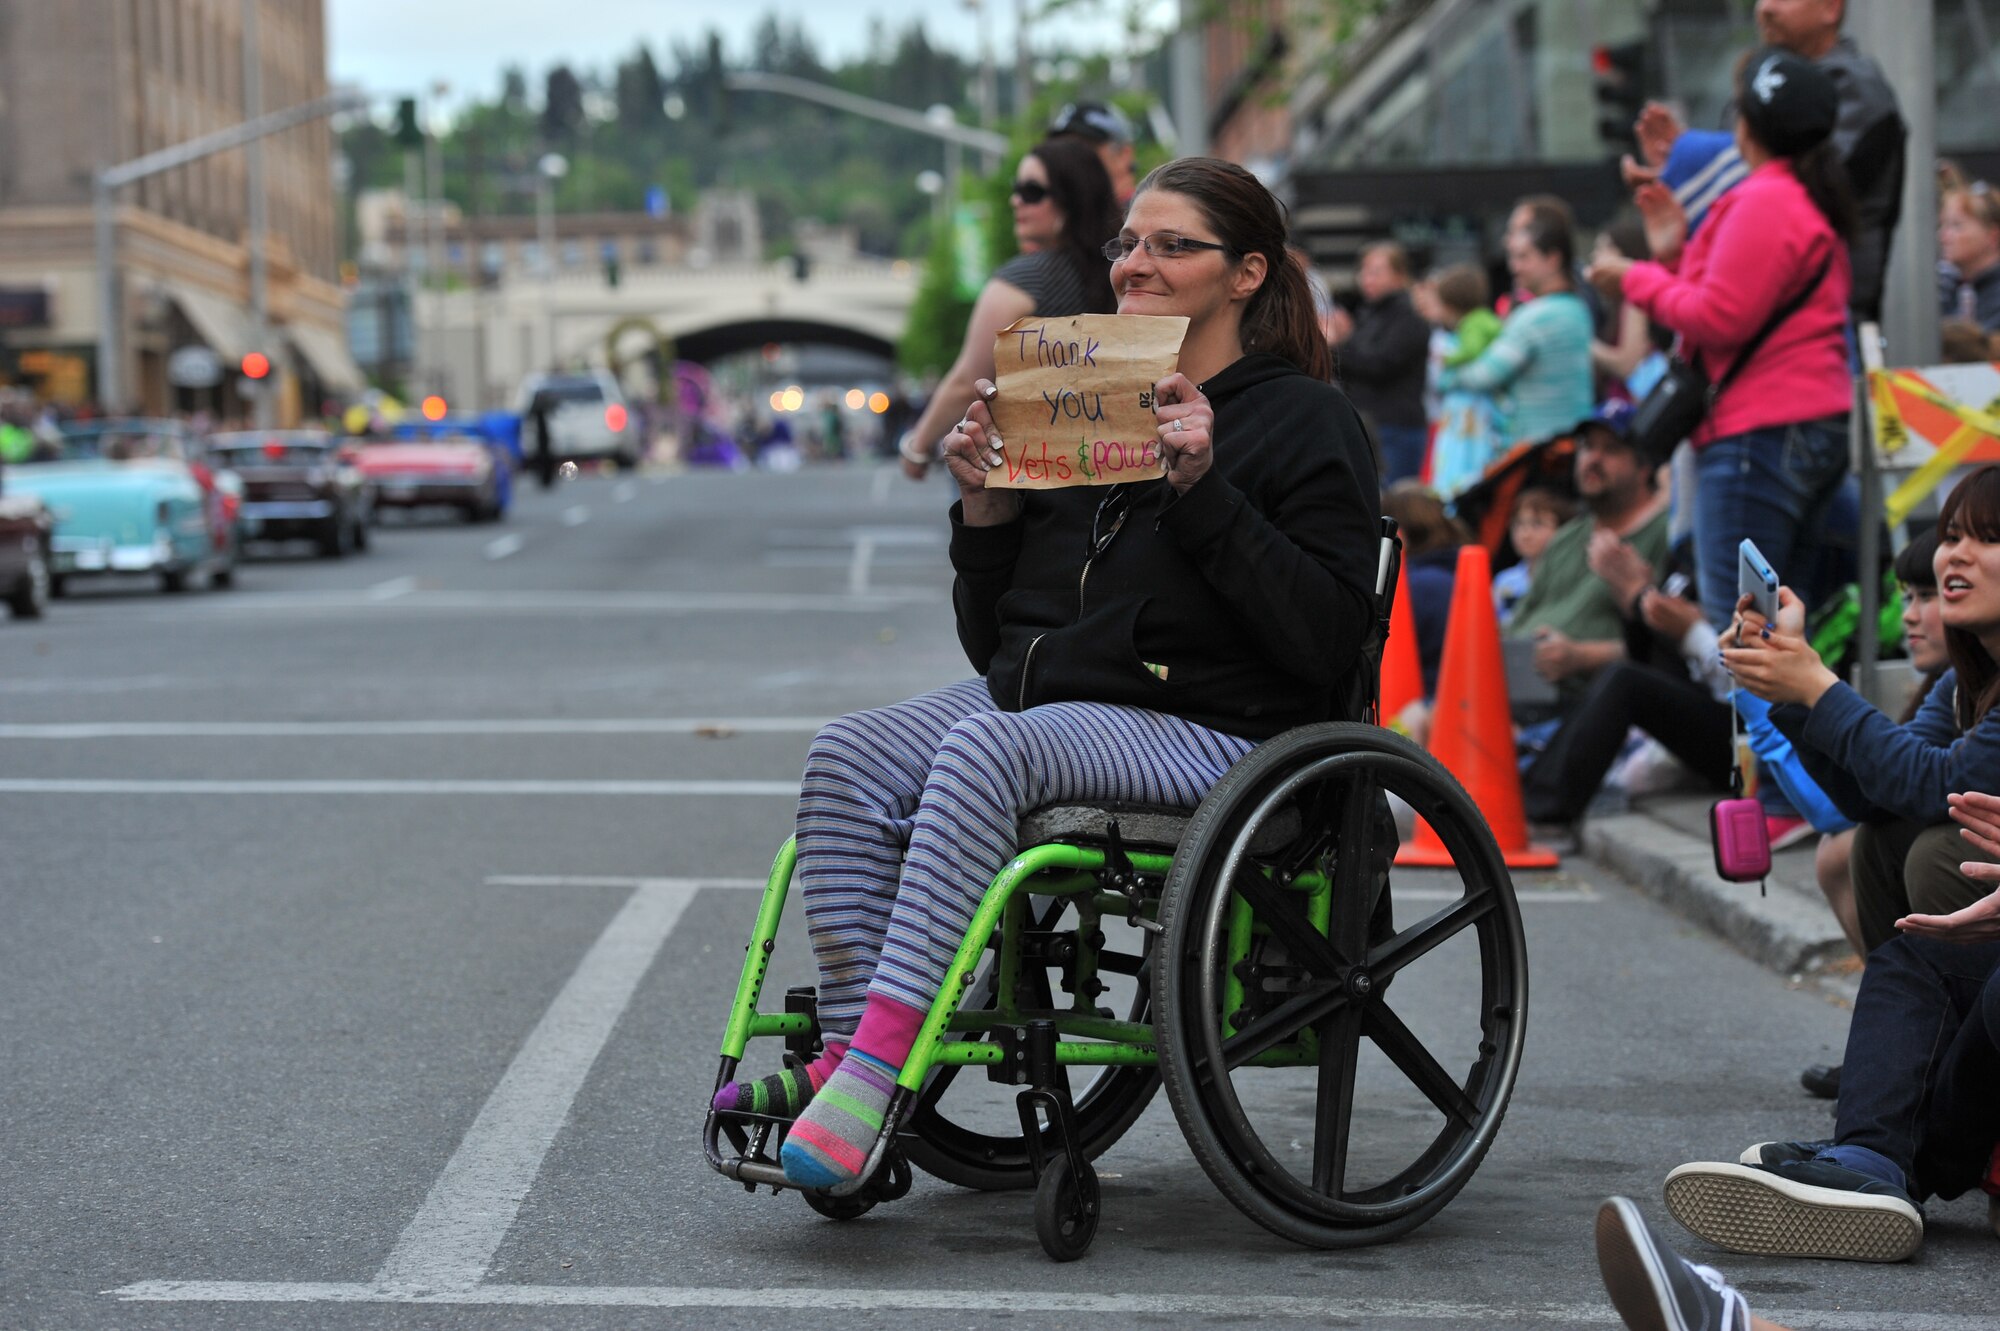 April Belnap holds up a sign for the war veterans and prisoners of war as the drive by during the Lilac Festival 2014 Armed Forced Torchlight Parade in Spokane Wash., May 17, 2014. This parade is the largest armed forces torchlight parade in the nation. (U.S. Air Force photo by Staff Sgt. Veronica Montes/Released) 